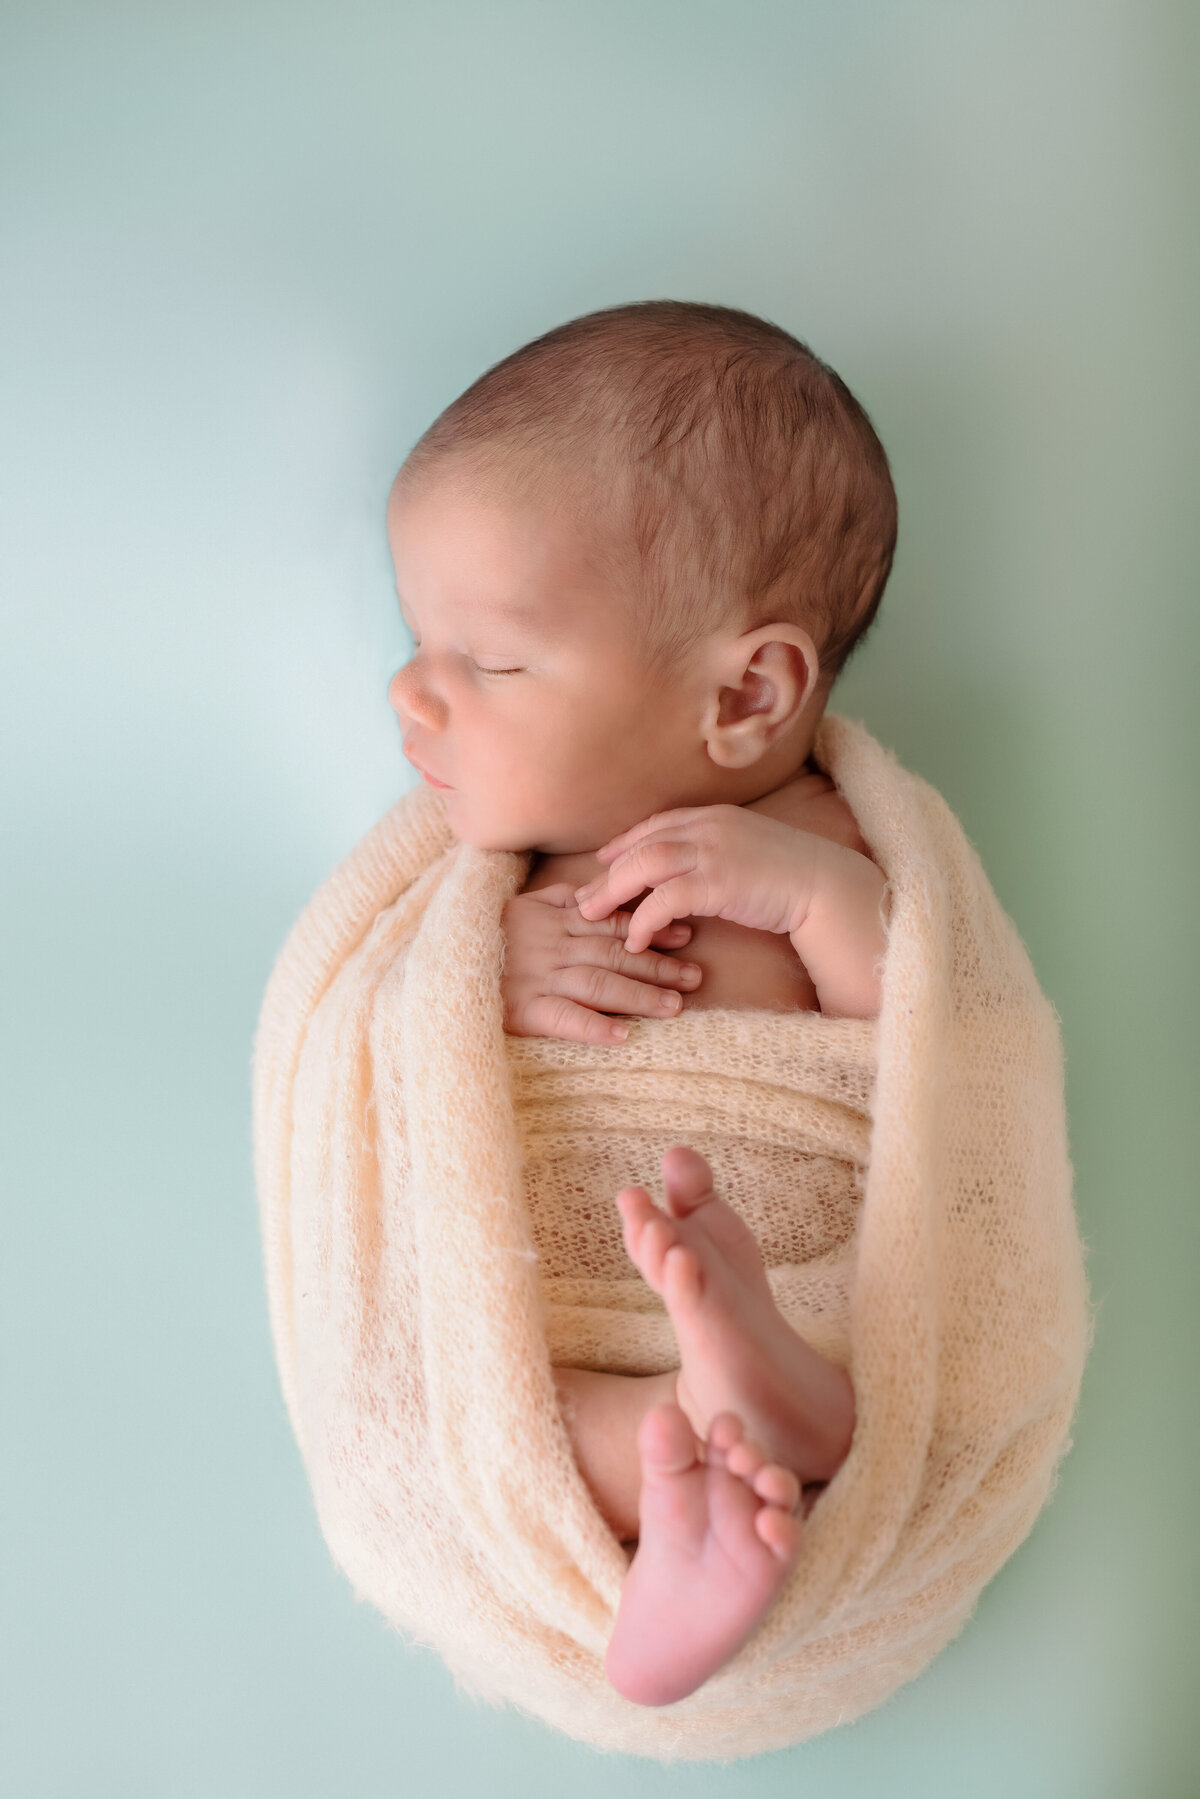 Newborn Photographer, a baby is wrapped in a soft yellow blanket